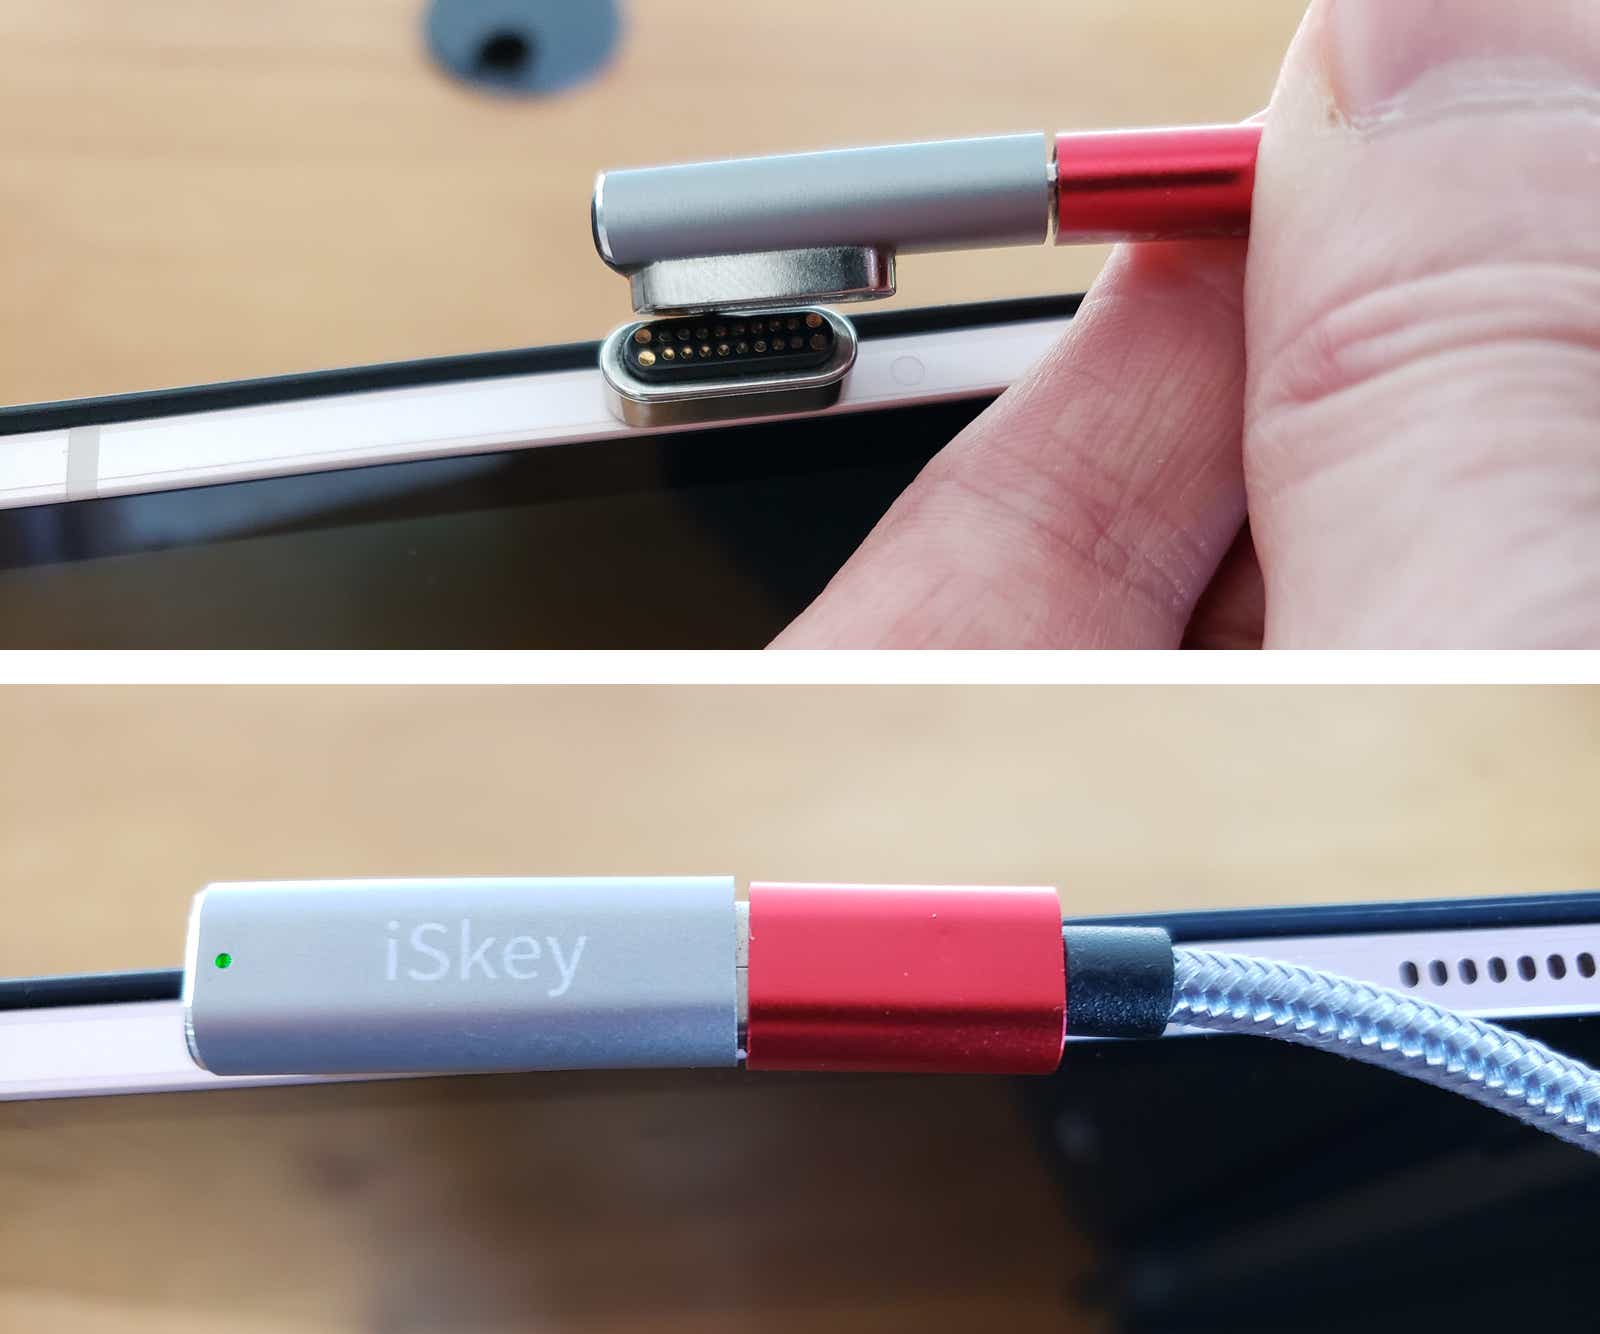 usb c explained iskey magnetic adapter